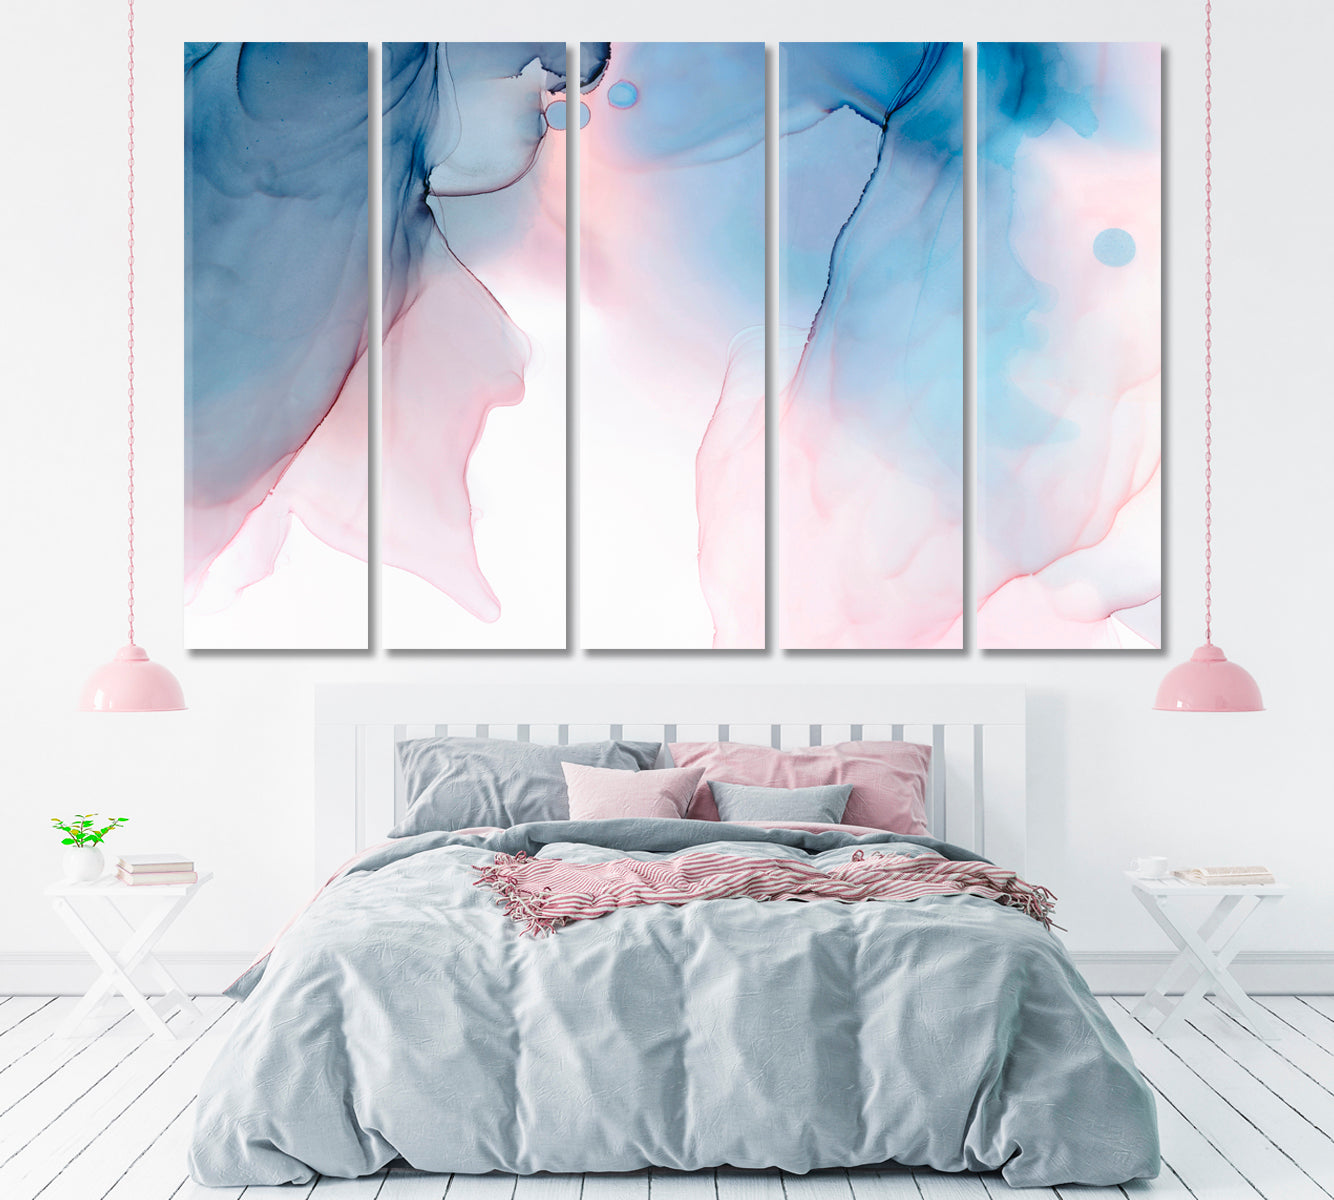 Blue and Pink Fluid Marble Canvas Print ArtLexy 5 Panels 36"x24" inches 